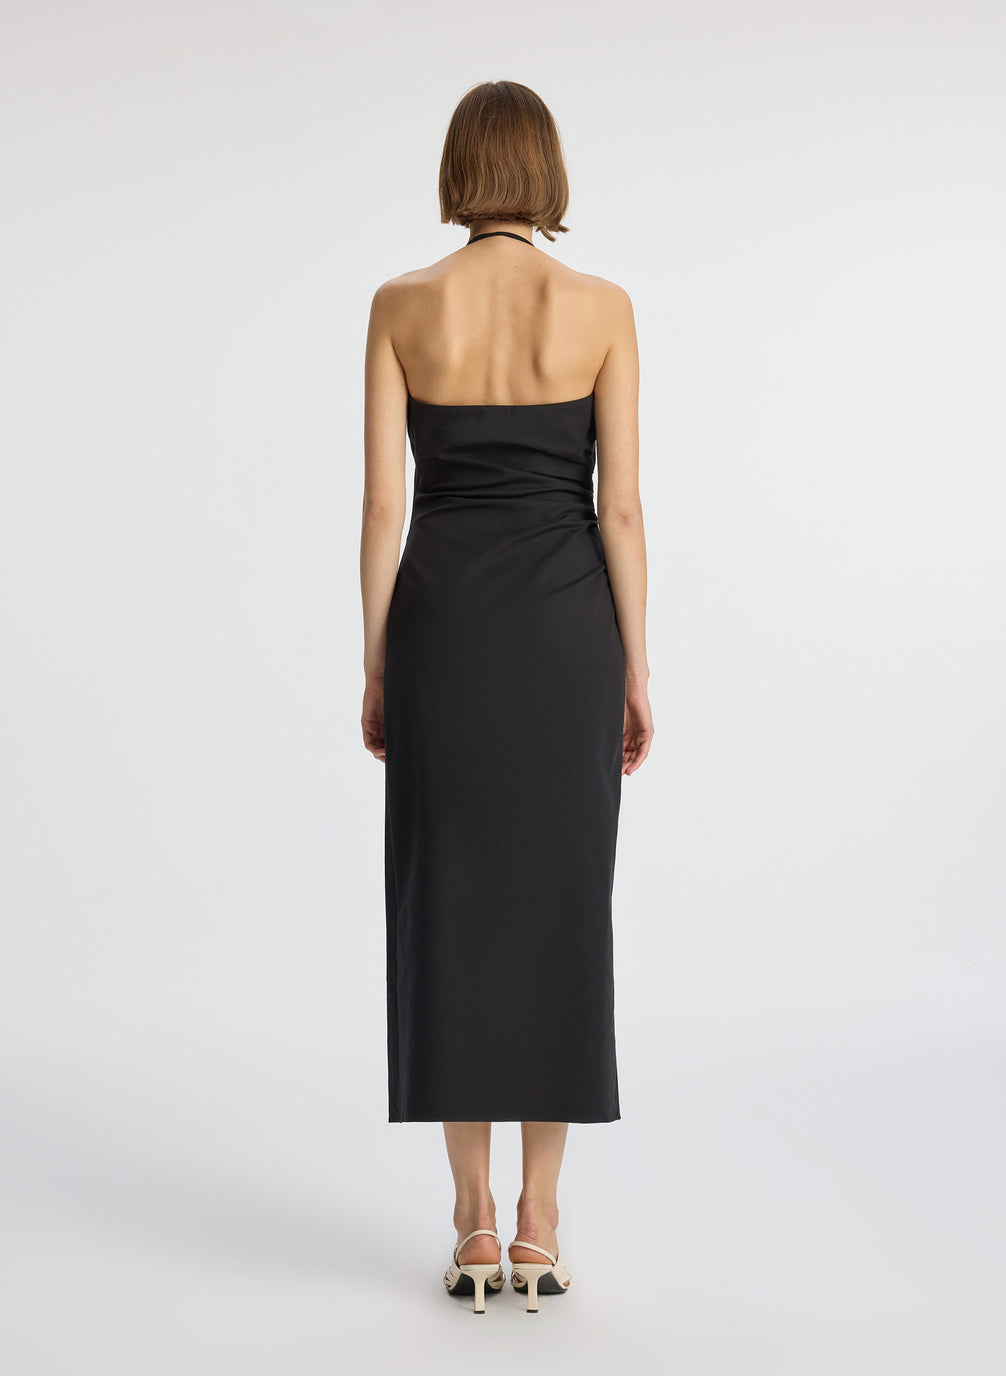 back view of woman wearing black halter neckline ruched midi dress